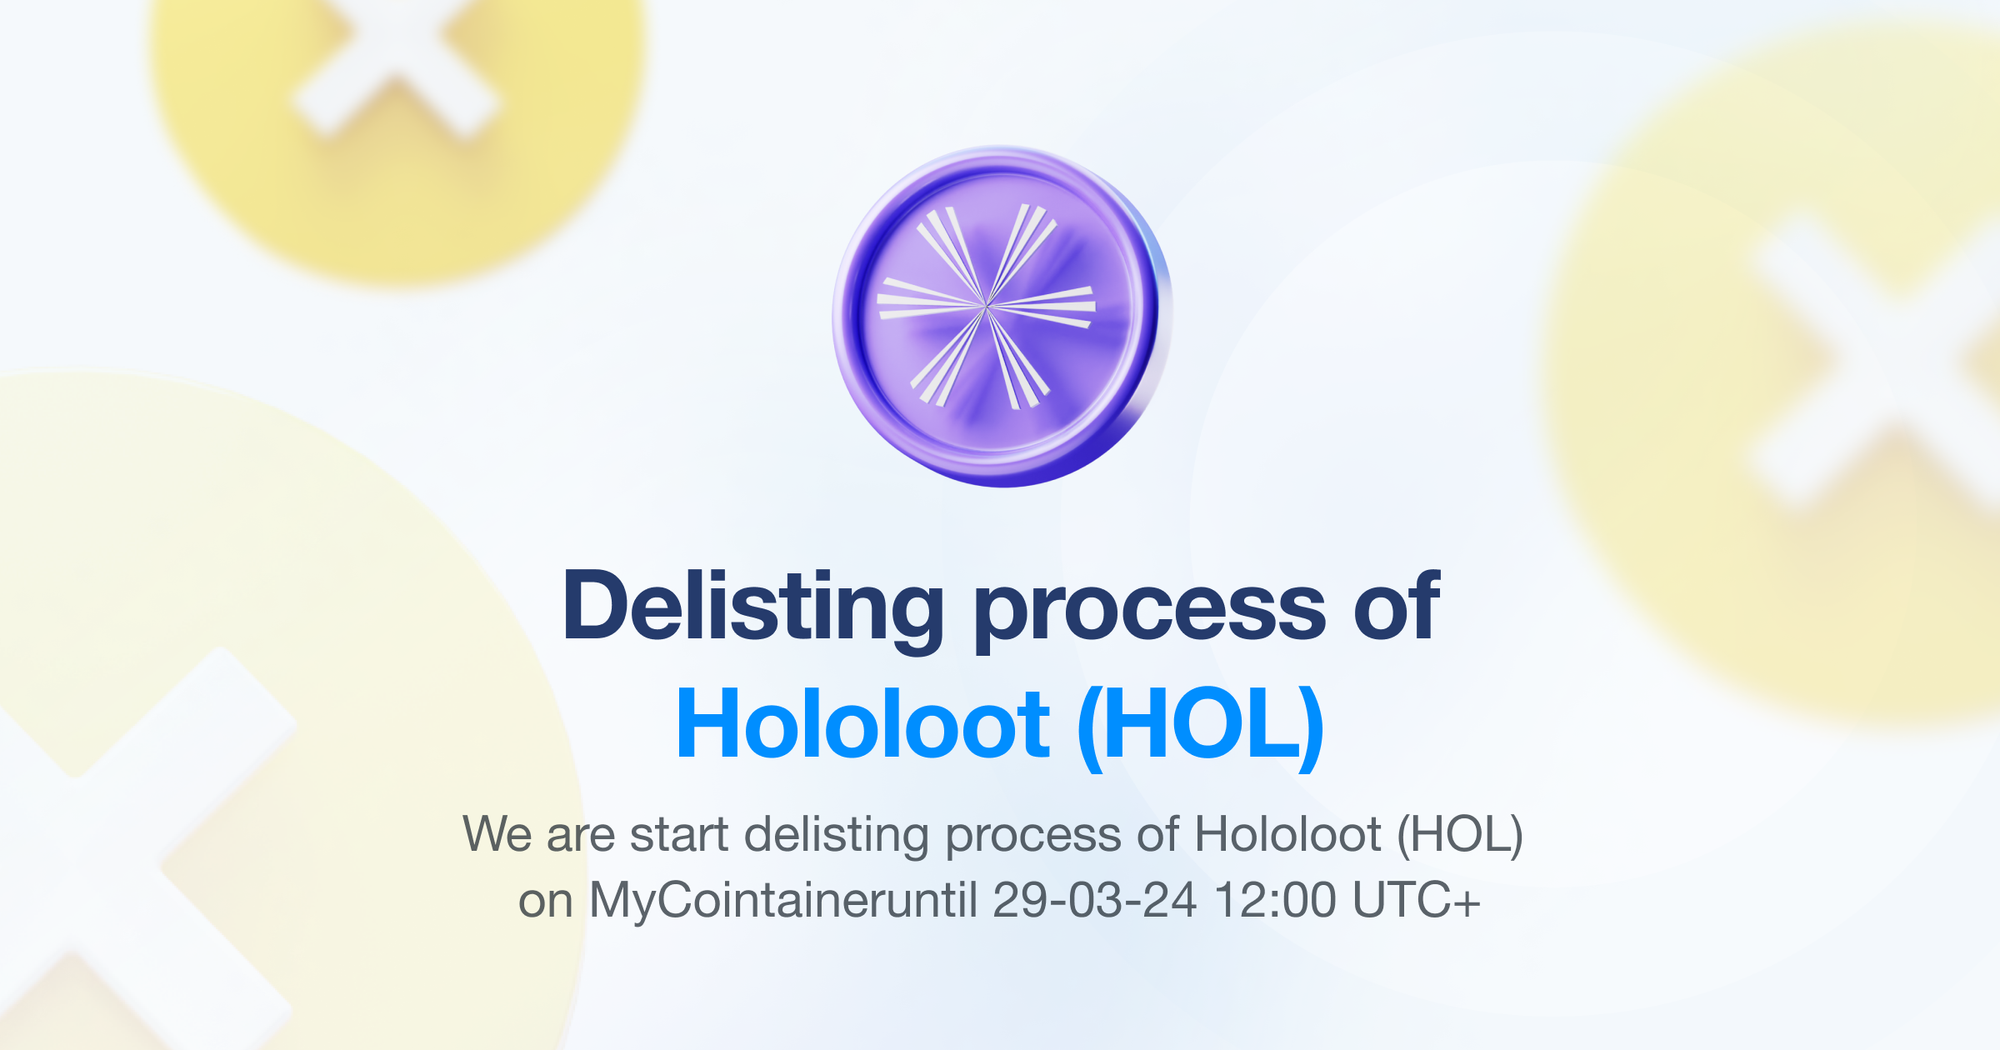 Important Update: Delisting of Hololoot ($HOL)